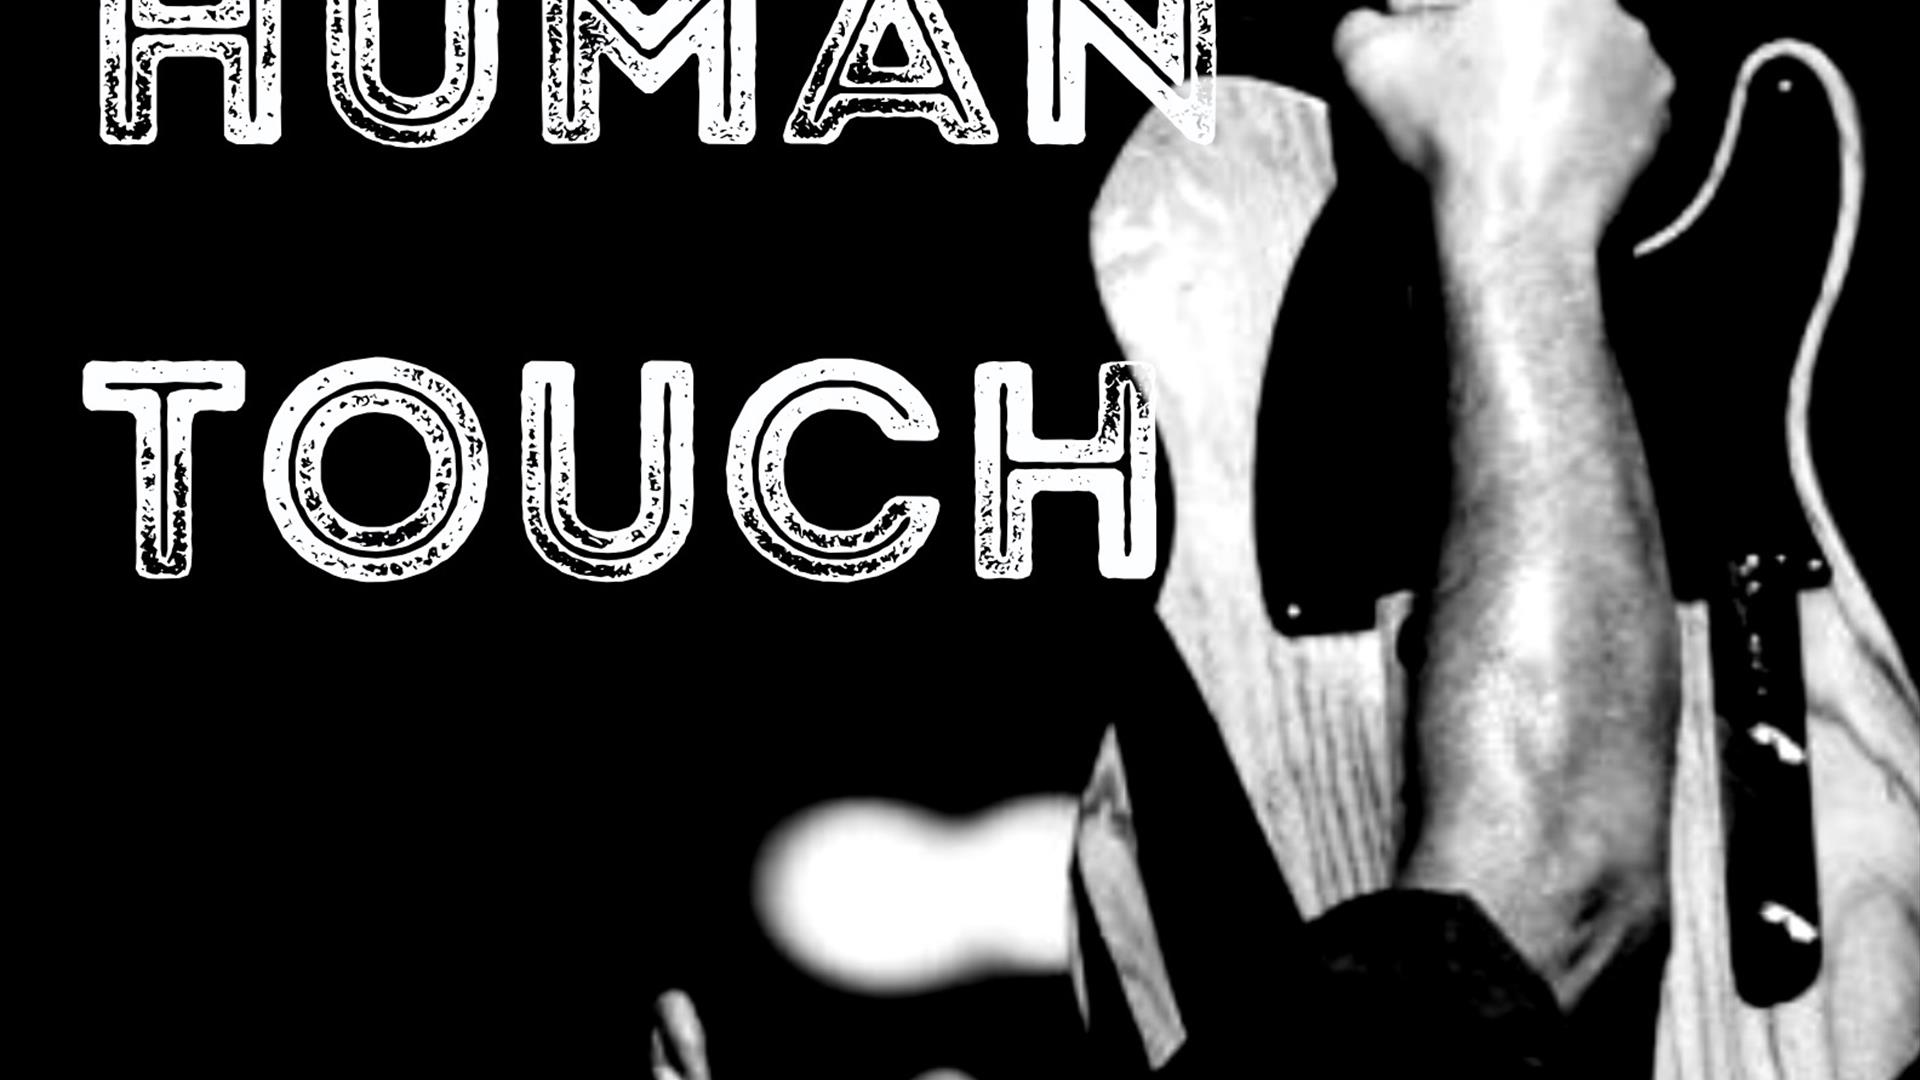 Black and white poster with Human Touch written on it and a hand and arm holding up a guitar